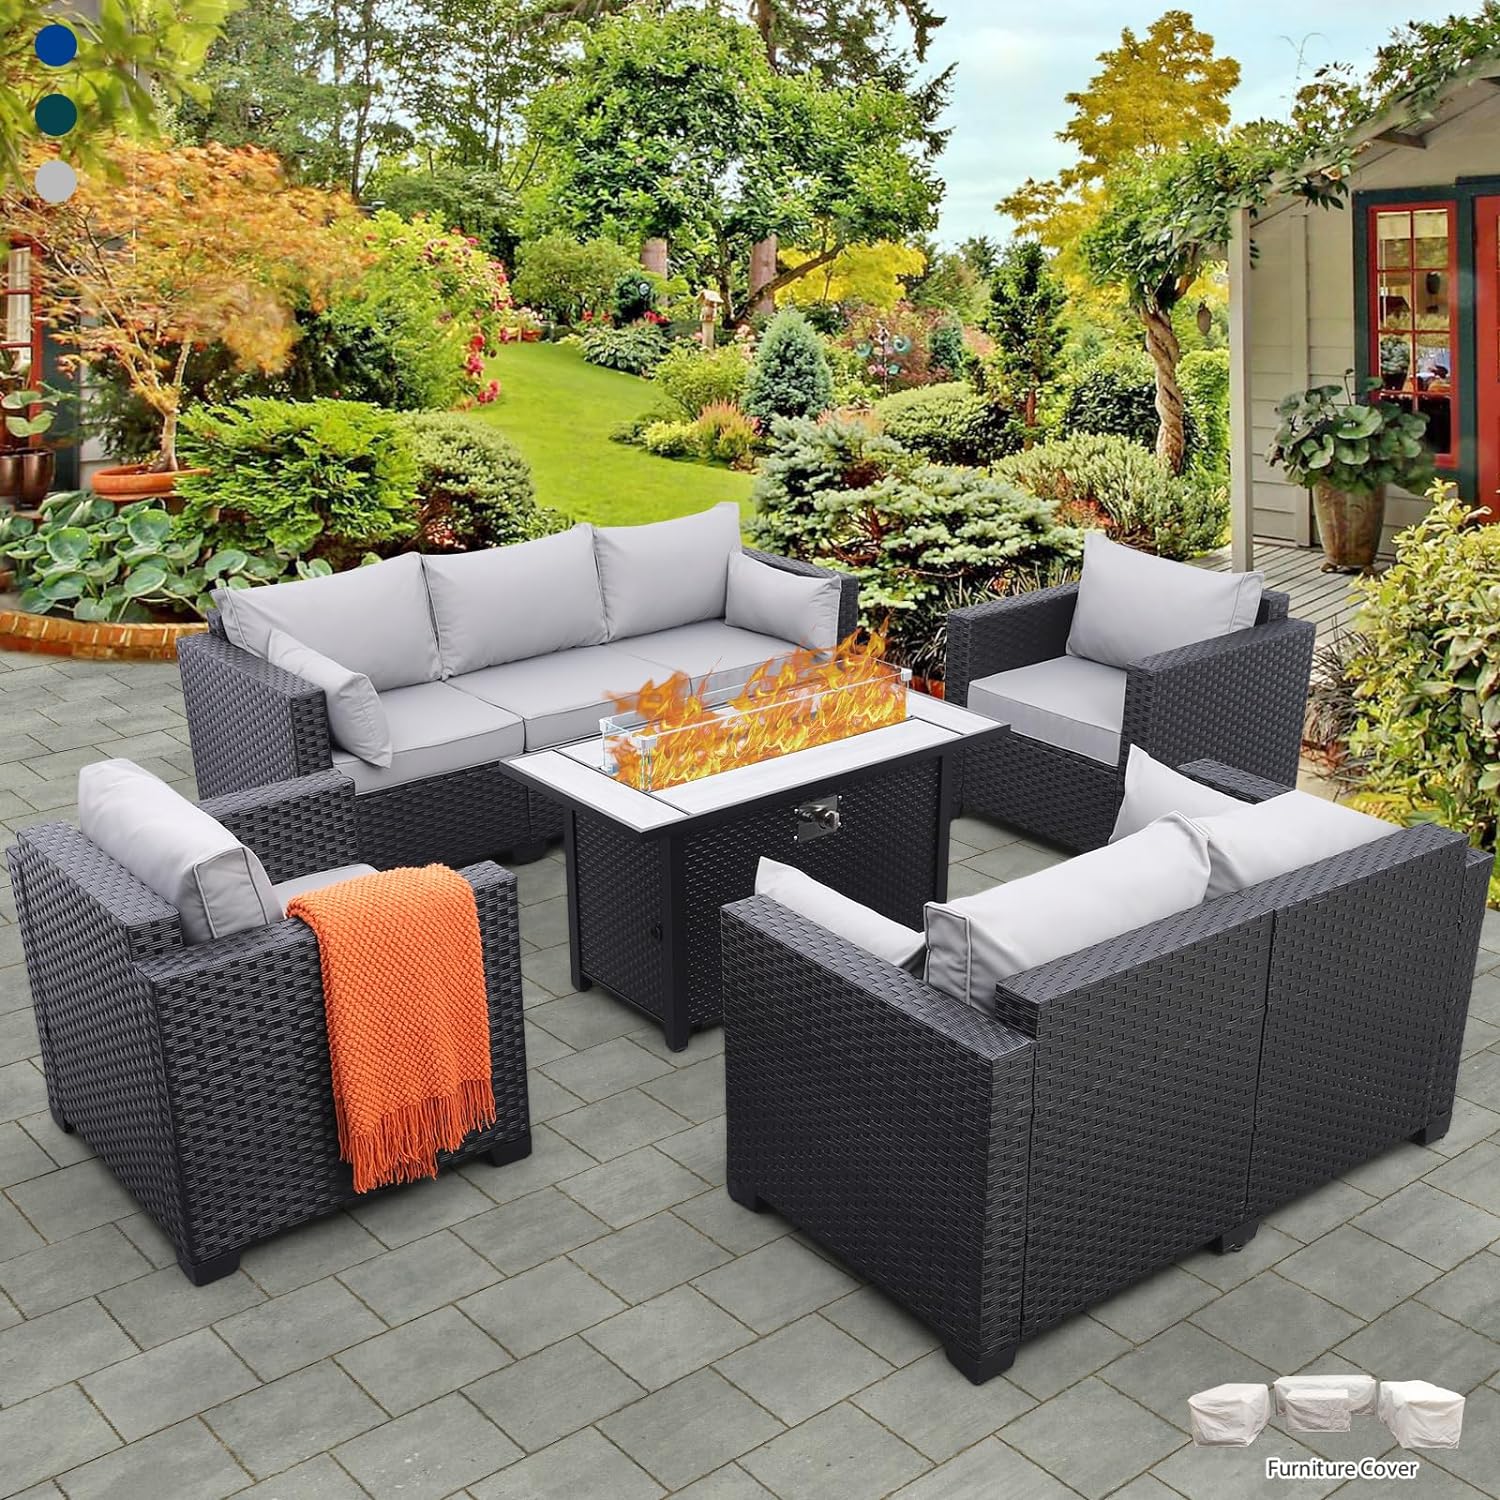 5 Pcs Outdoor Furniture Sets Patio Furniture Set with 45 Fire Pit Patio Couch Outdoor Chairs 60000 BTU Wicker Propane Fire Pit Table with No-slip Cushions and Waterproof Covers, Grey